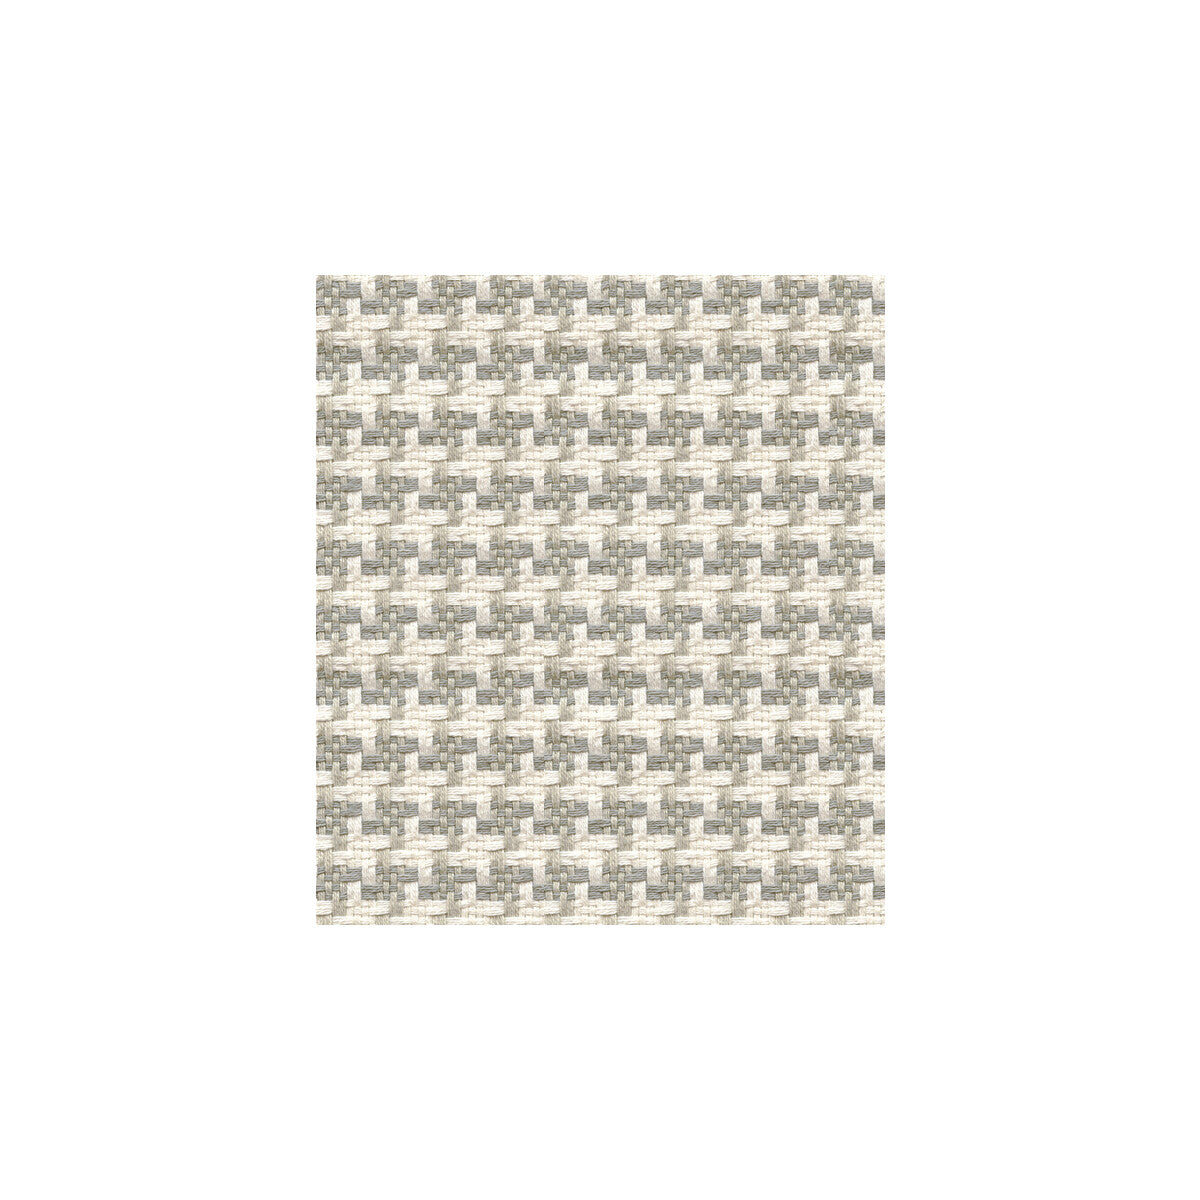 Huron fabric in linen color - pattern 32993.11.0 - by Kravet Basics in the Sarah Richardson Affinity collection